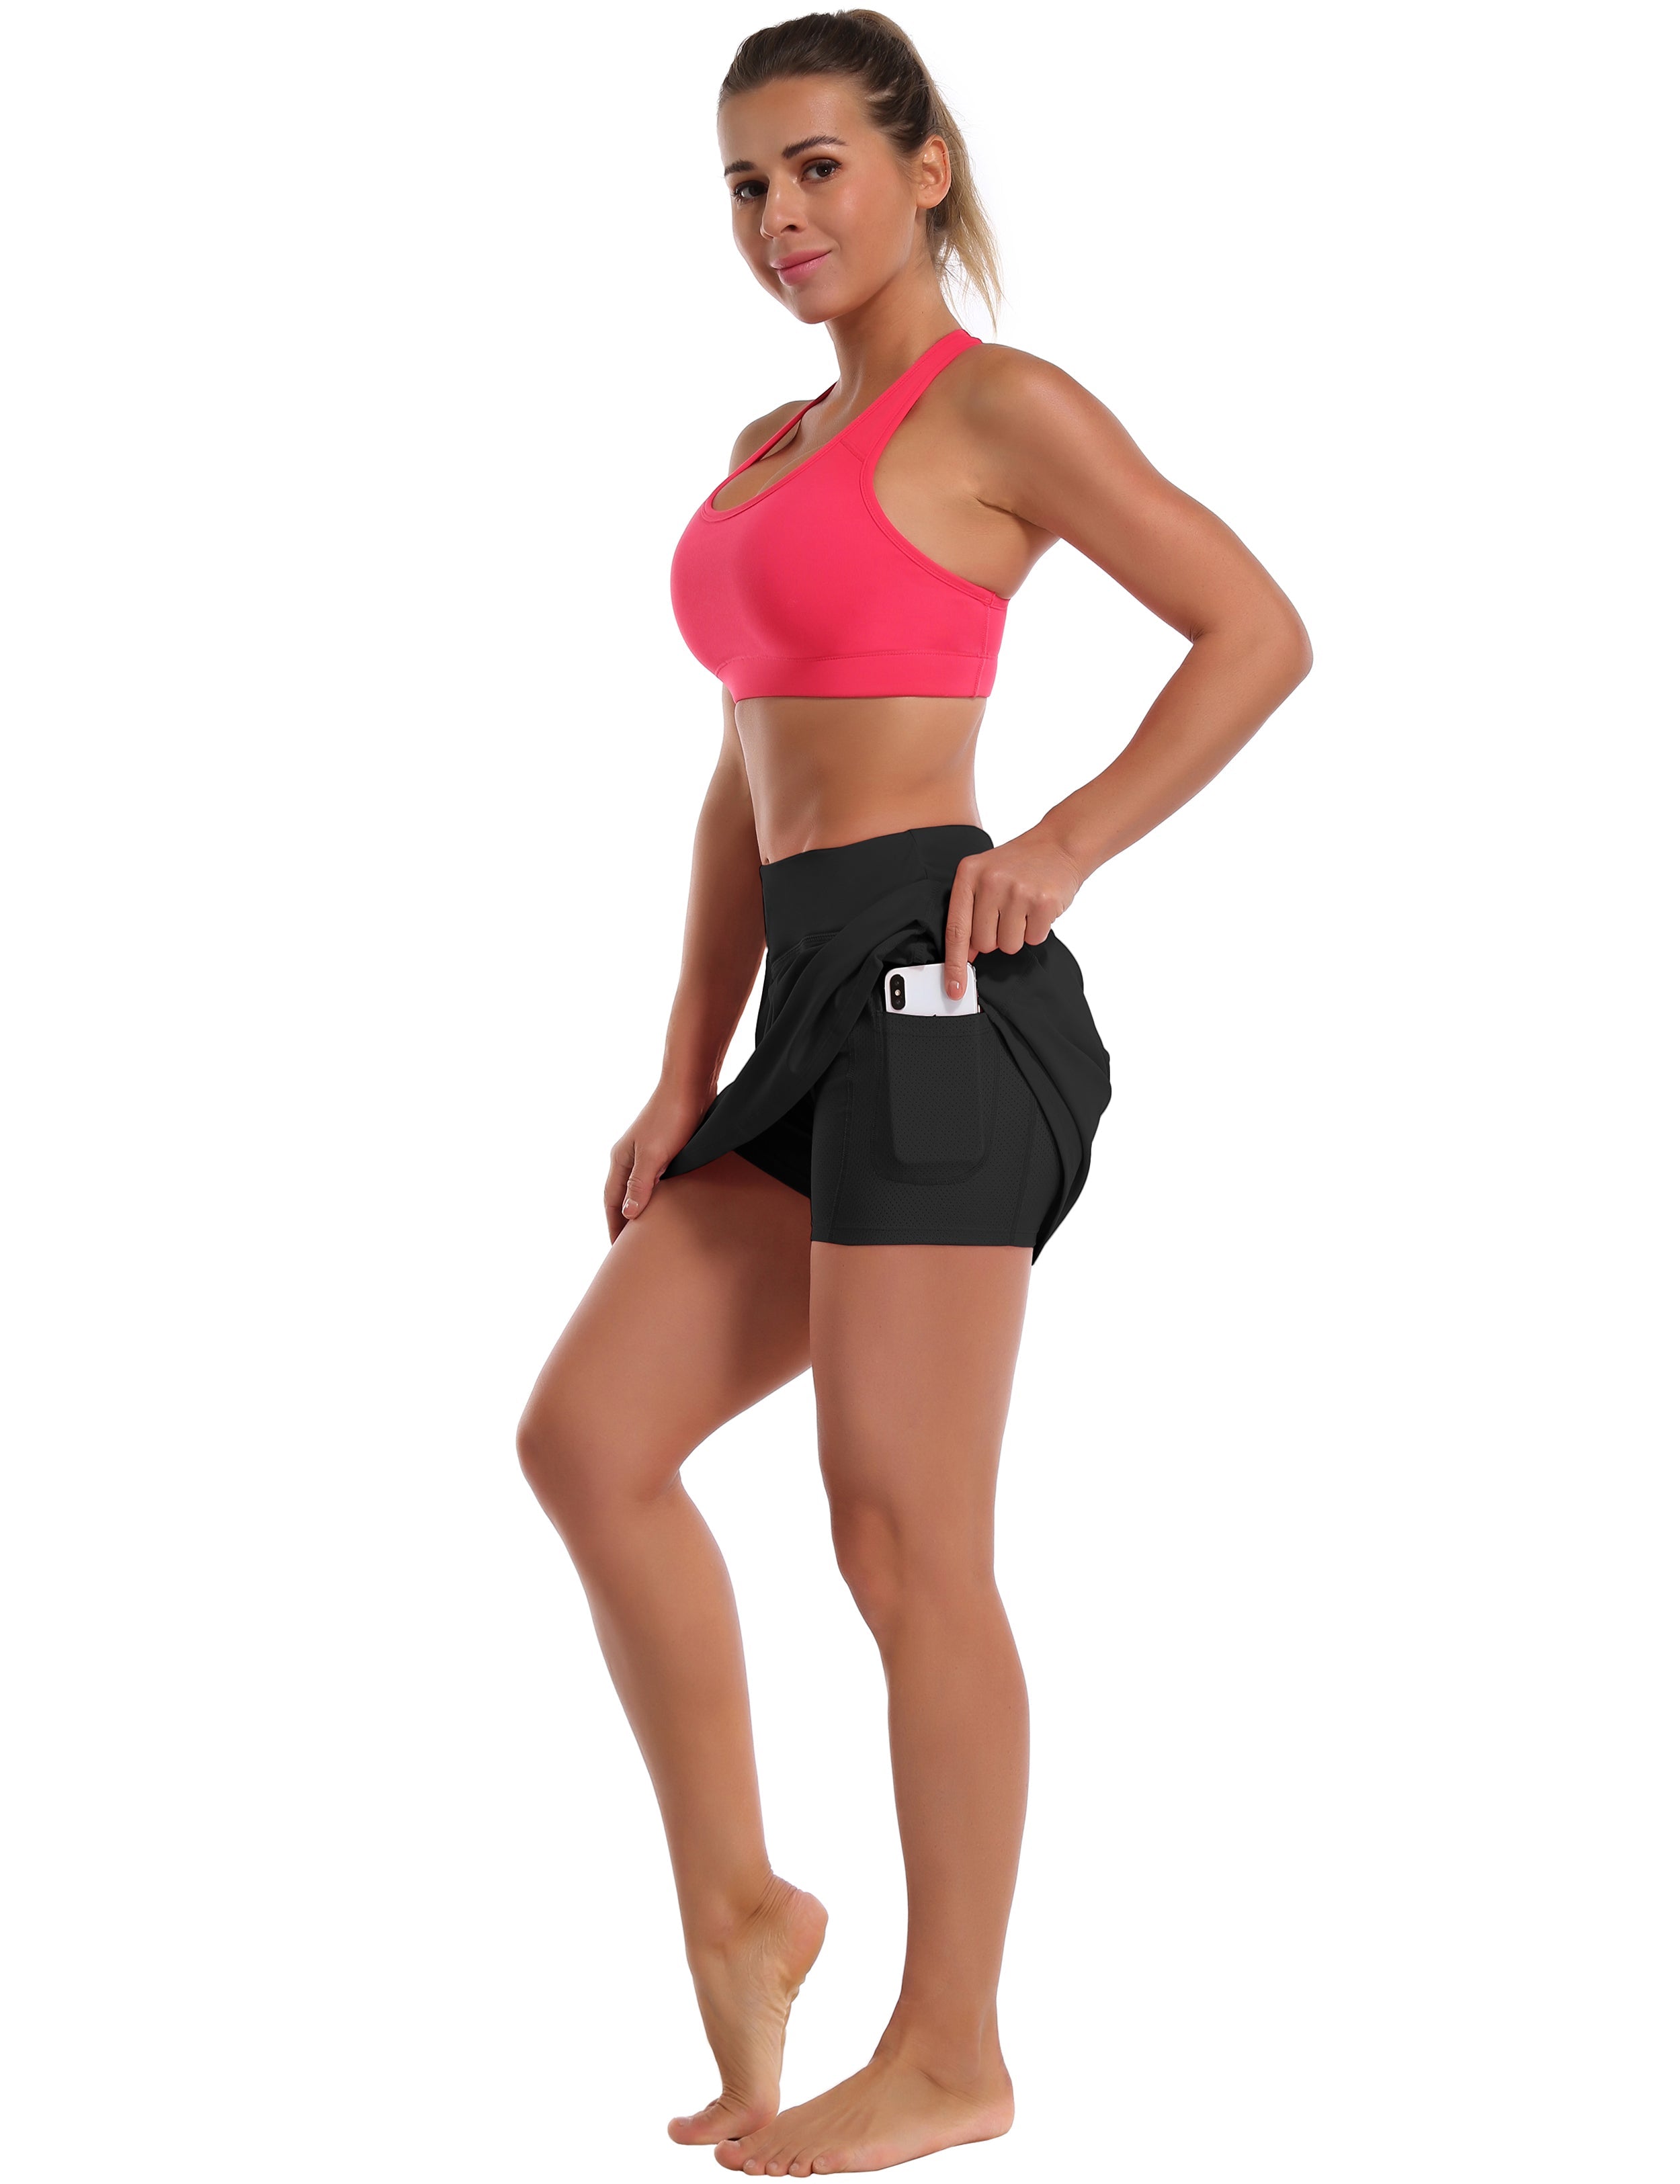 Athletic Tennis Golf Skort with Pocket Shorts black 80%Nylon/20%Spandex UPF 50+ sun protection Elastic closure Lightweight, Wrinkle Moisture wicking Quick drying Secure & comfortable two layer Hidden pocket